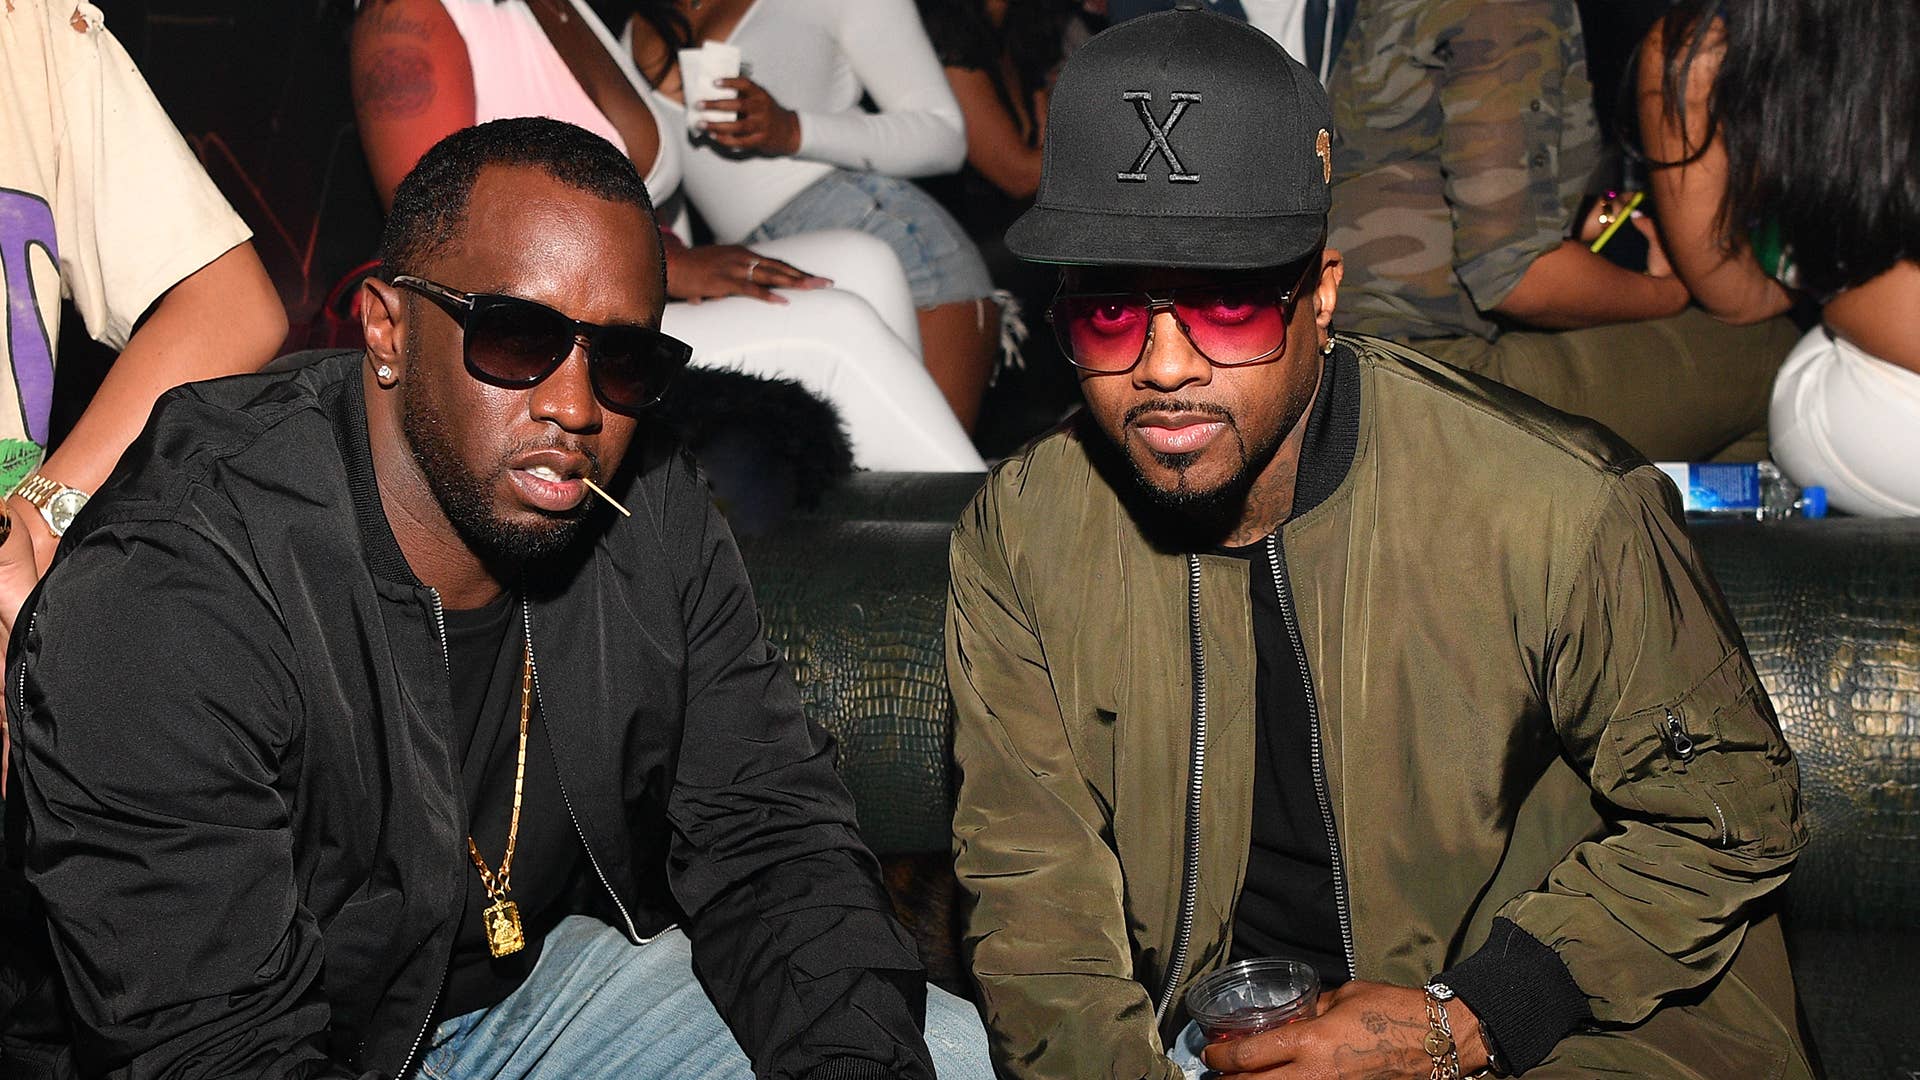 Sean "Diddy" Combs and Jermaine Dupri attend XS Lounge